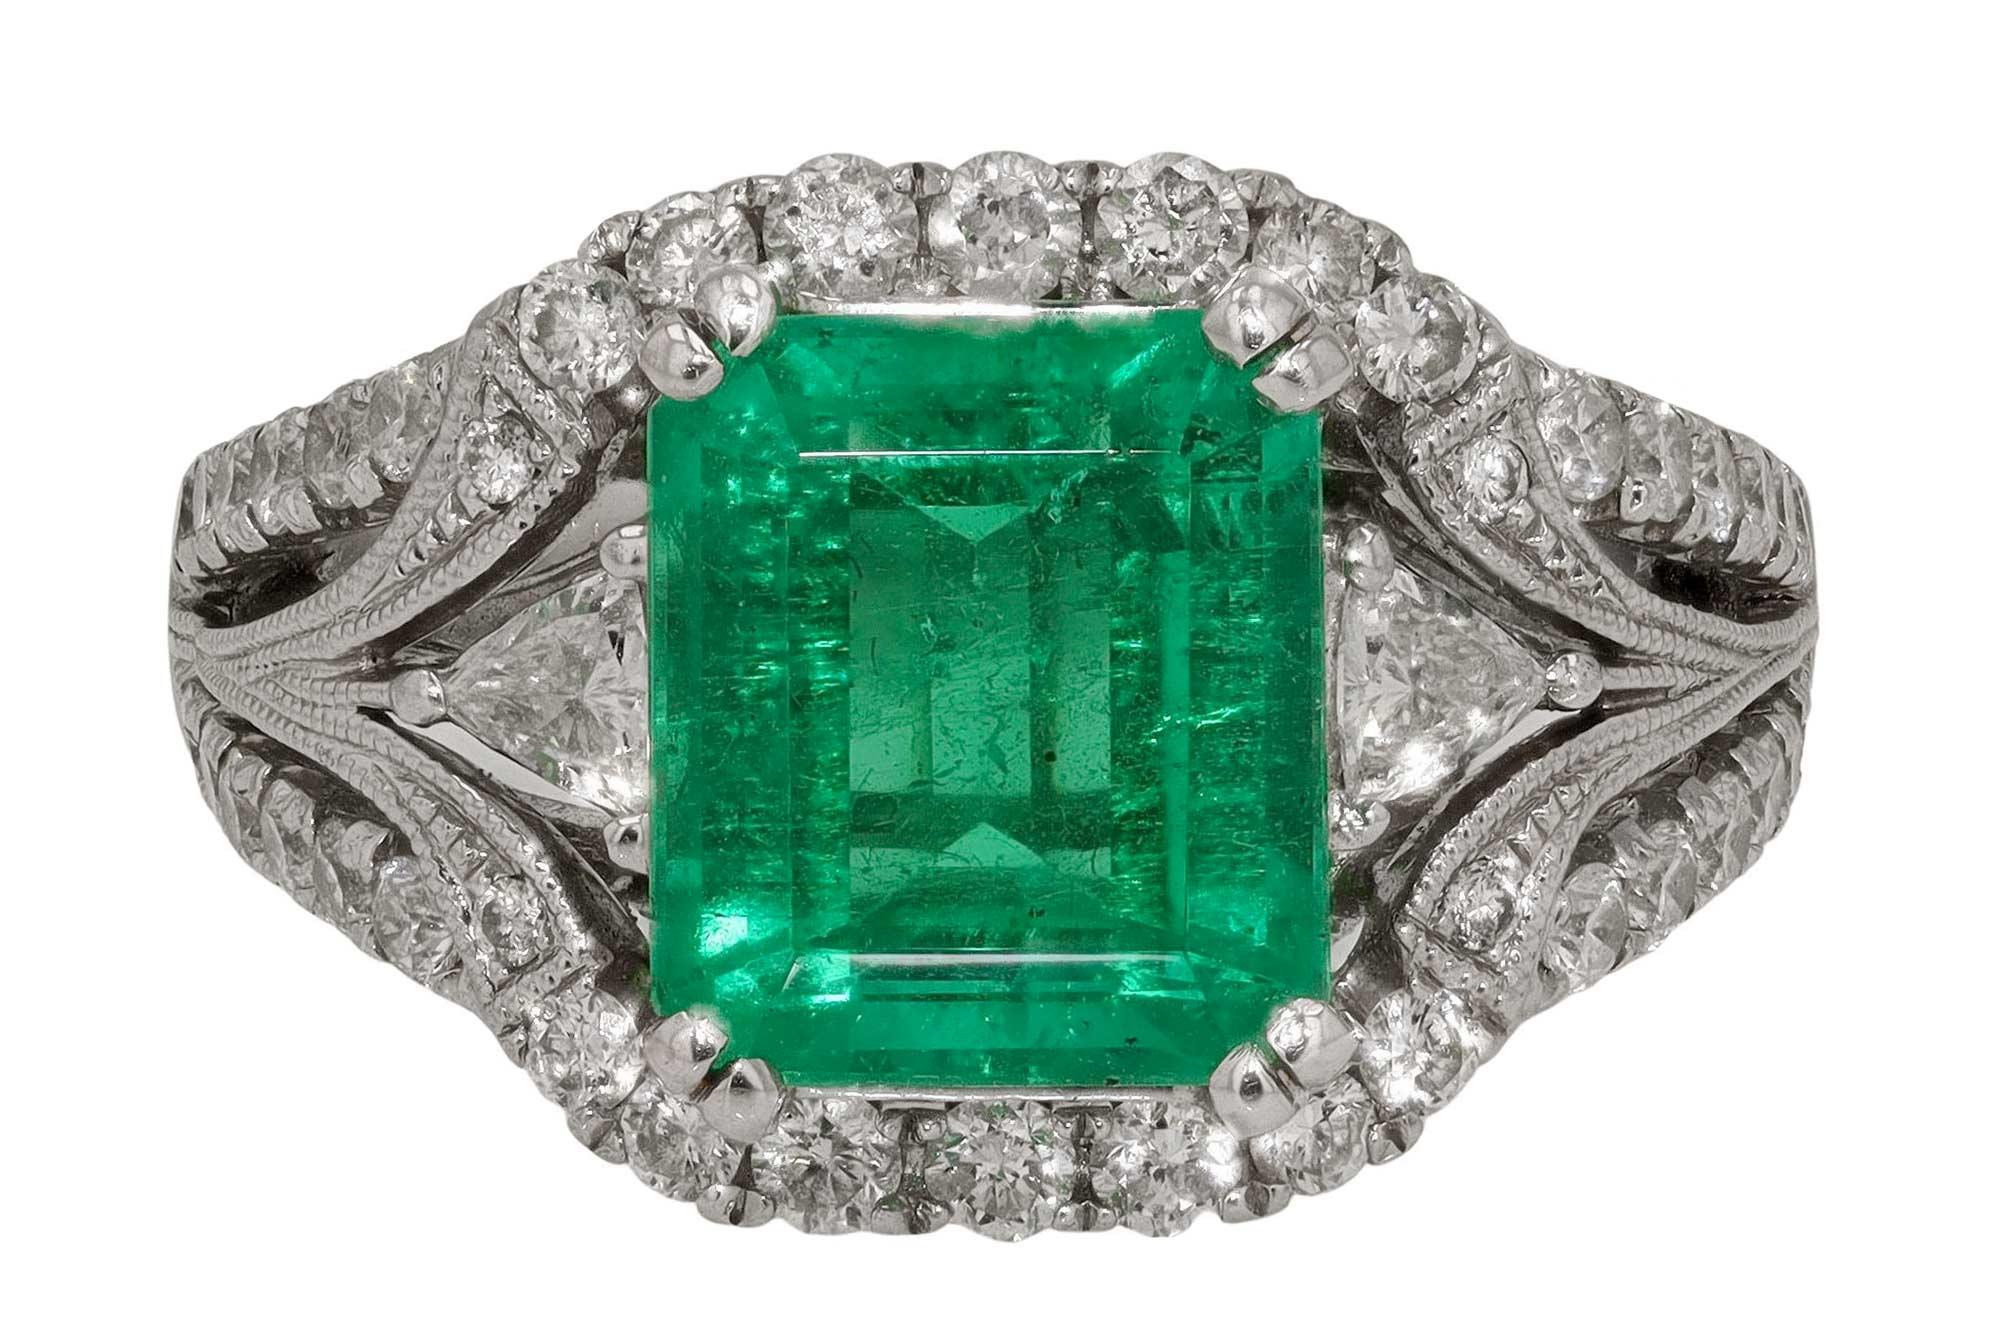 Vintage 2.75 Carat Emerald Cocktail Ring In Good Condition For Sale In Santa Barbara, CA